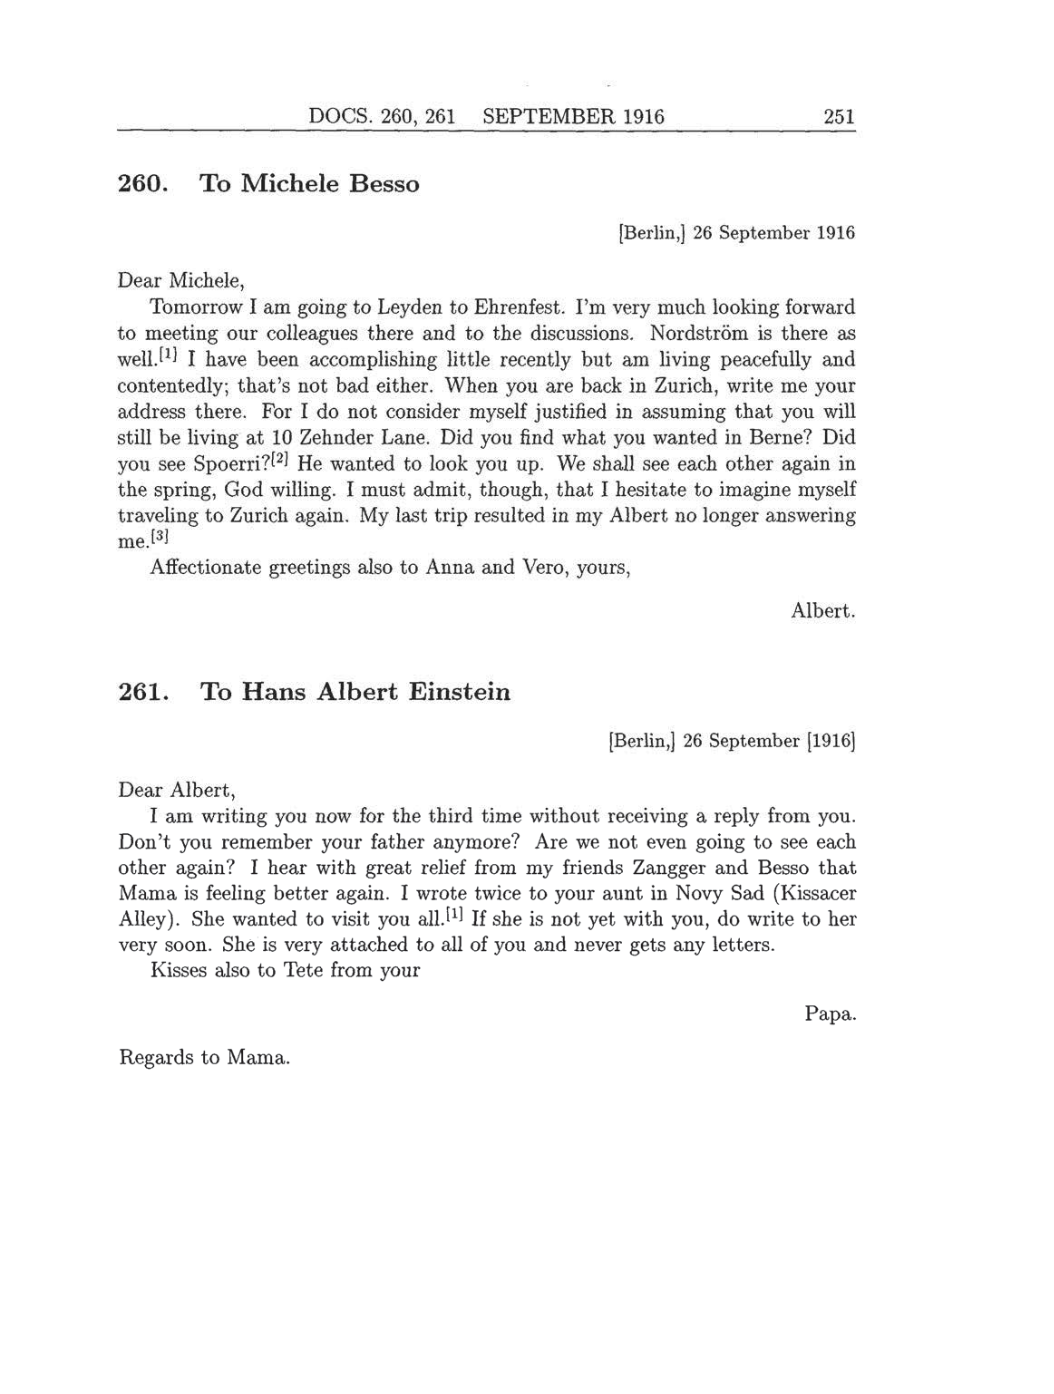 Volume 8: The Berlin Years: Correspondence, 1914-1918 (English translation supplement) page 251